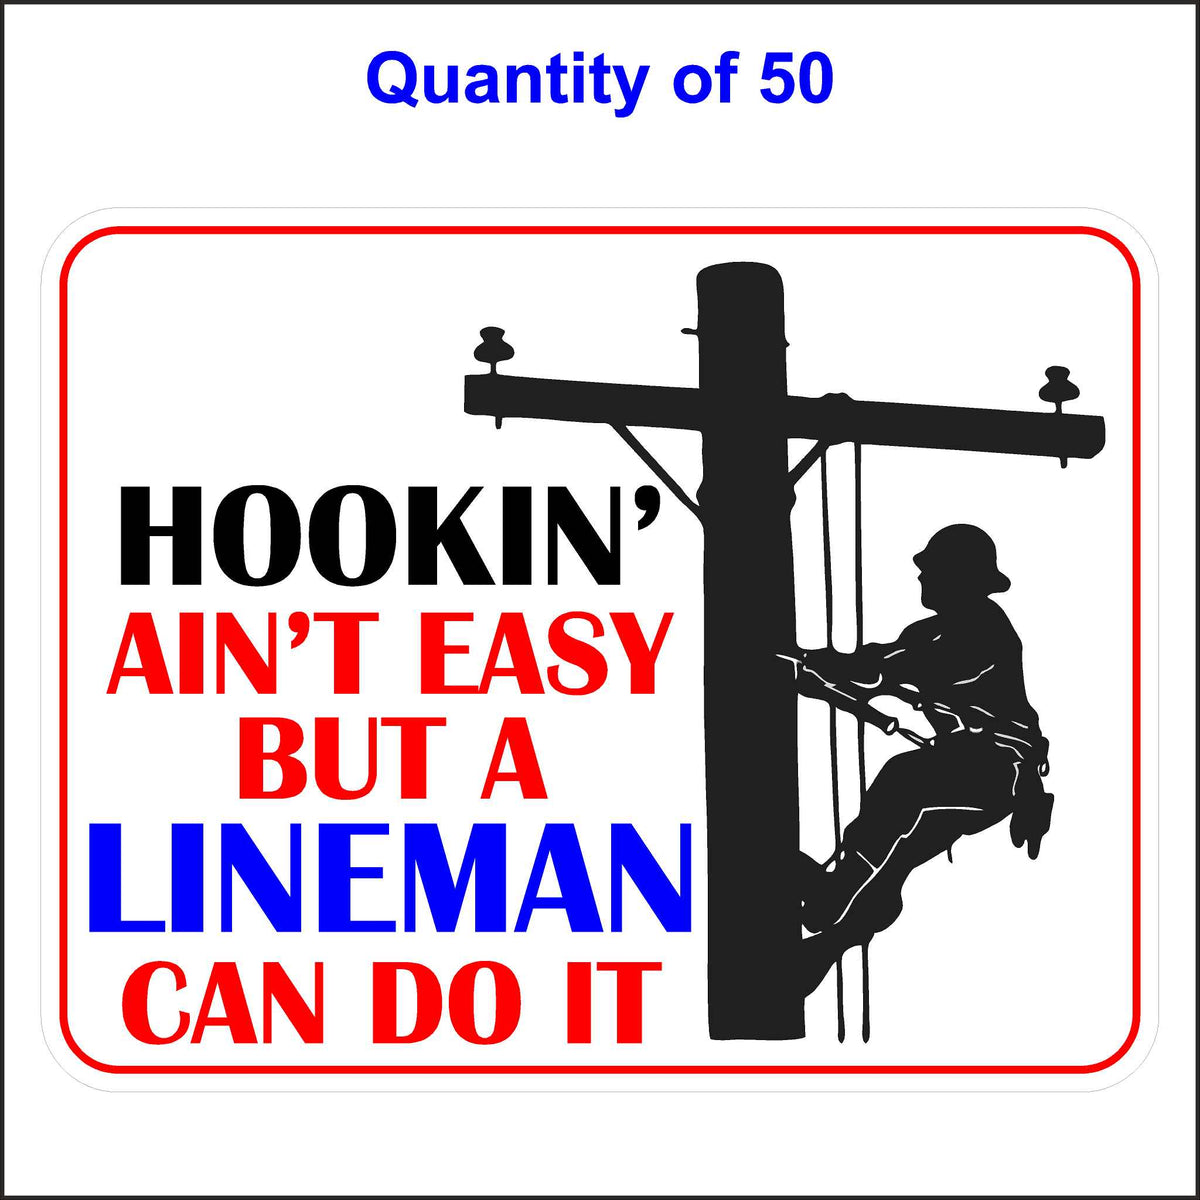 Lineman Sticker Printed With a Picture of a Lineman on a Pole. The Words “Hookin’ Ain’t Easy but a Lineman Can Do It” Are Printed in Red and Blue. 50 Quantity.